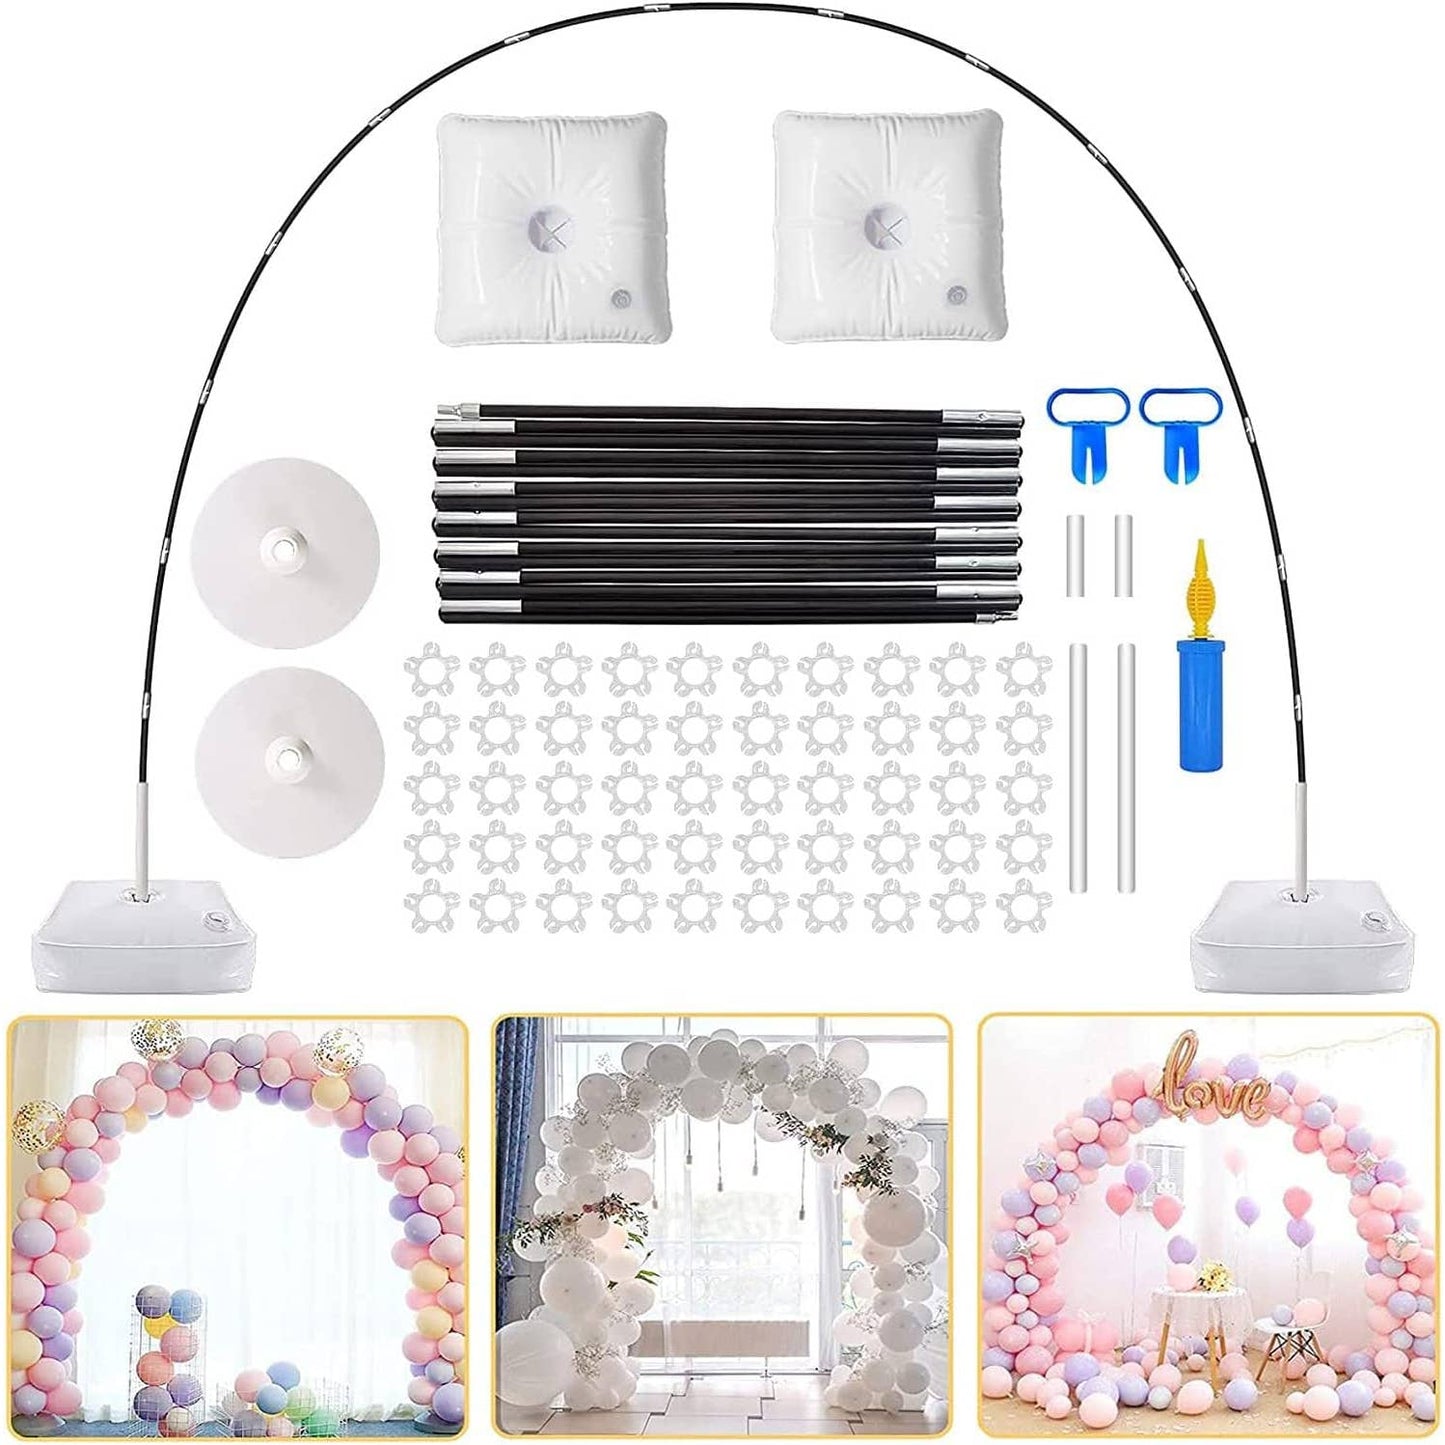 Portable Balloon Party archway Kit